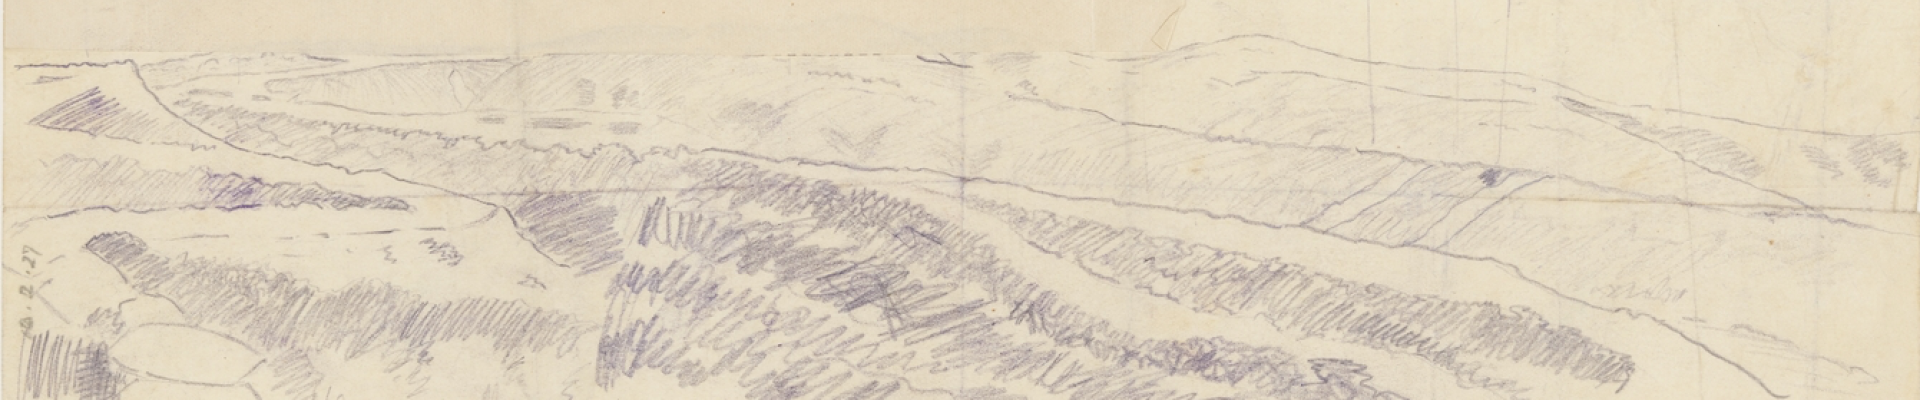 Collection of maps and views drawn by Captain Brian Gaynor during World War I 